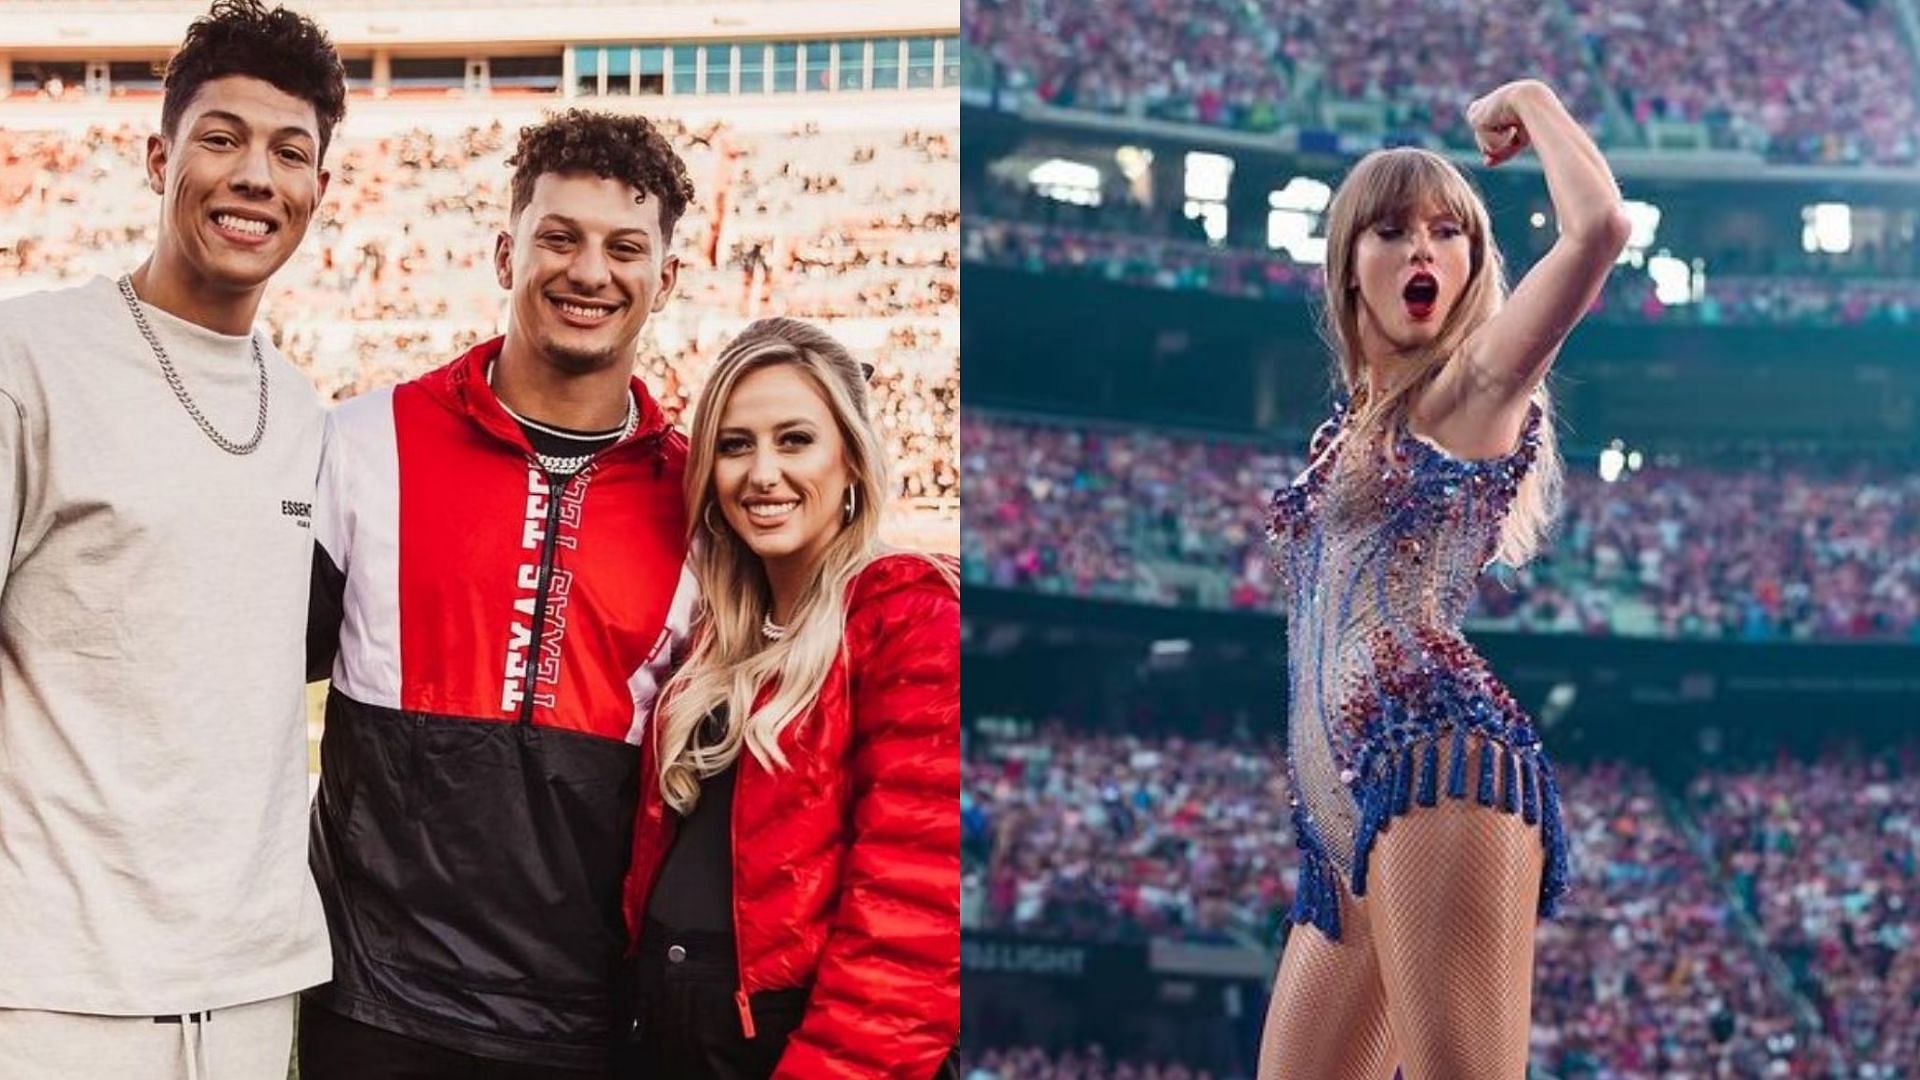 Taylor Swift Is Getting Warned About Patrick Mahomes' Brother, Jackson -  The Spun: What's Trending In The Sports World Today